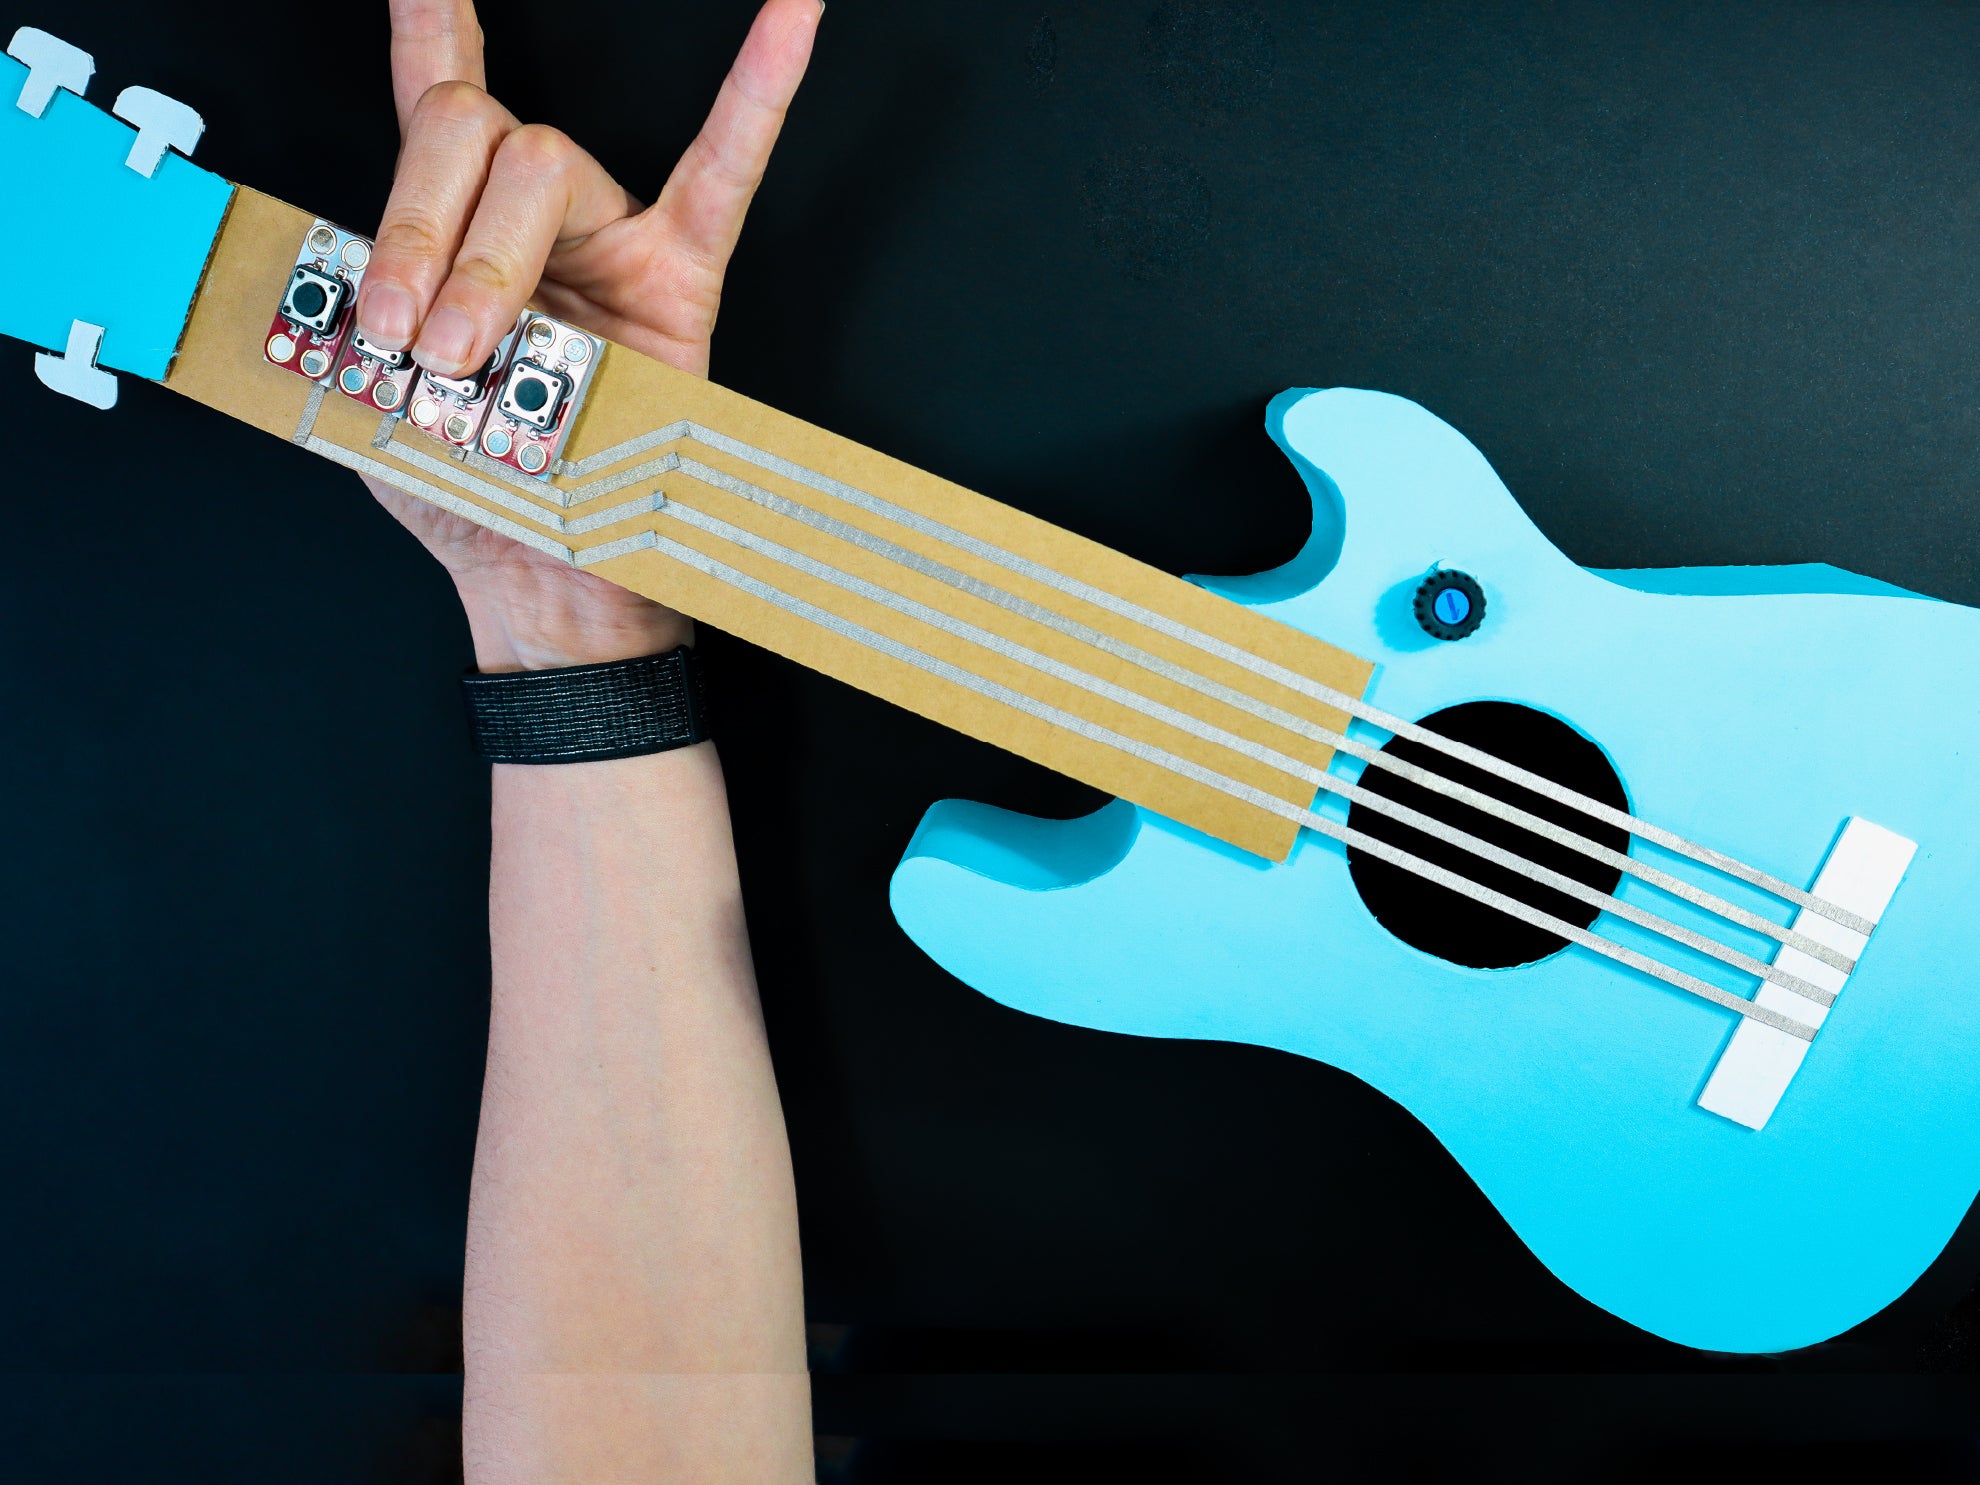 The Instant Star Guitar: A 4-Chord Guitar that makes you an Instant Rock Star